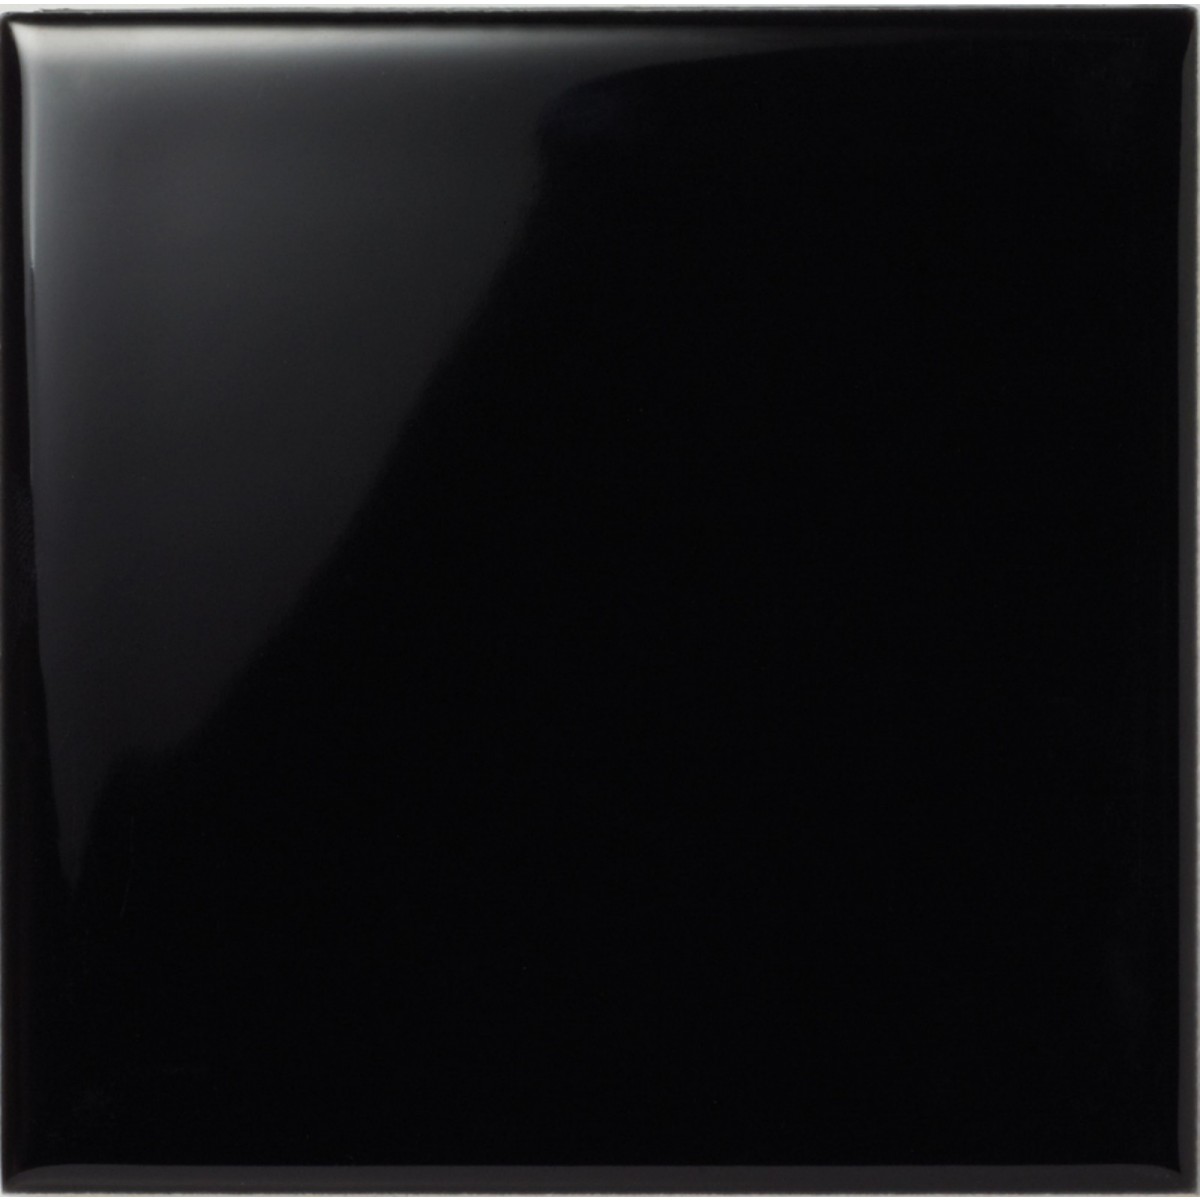 Gloss Black Field For Your